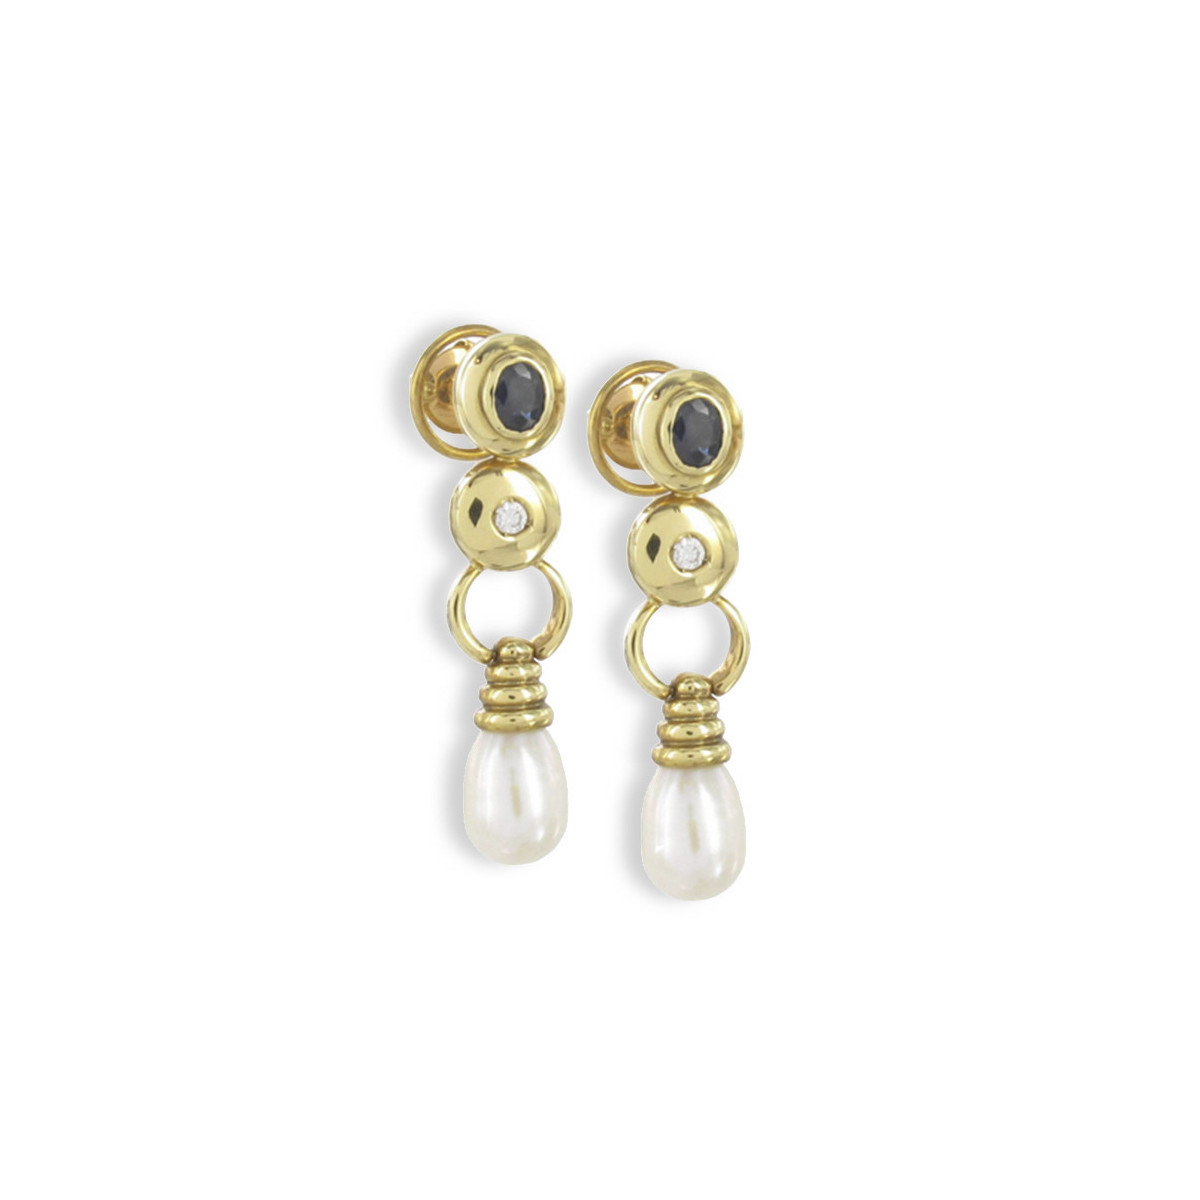 YELLOW GOLD EARINGS W/ PEARL,SAPPHIRE AND DIAMONDS